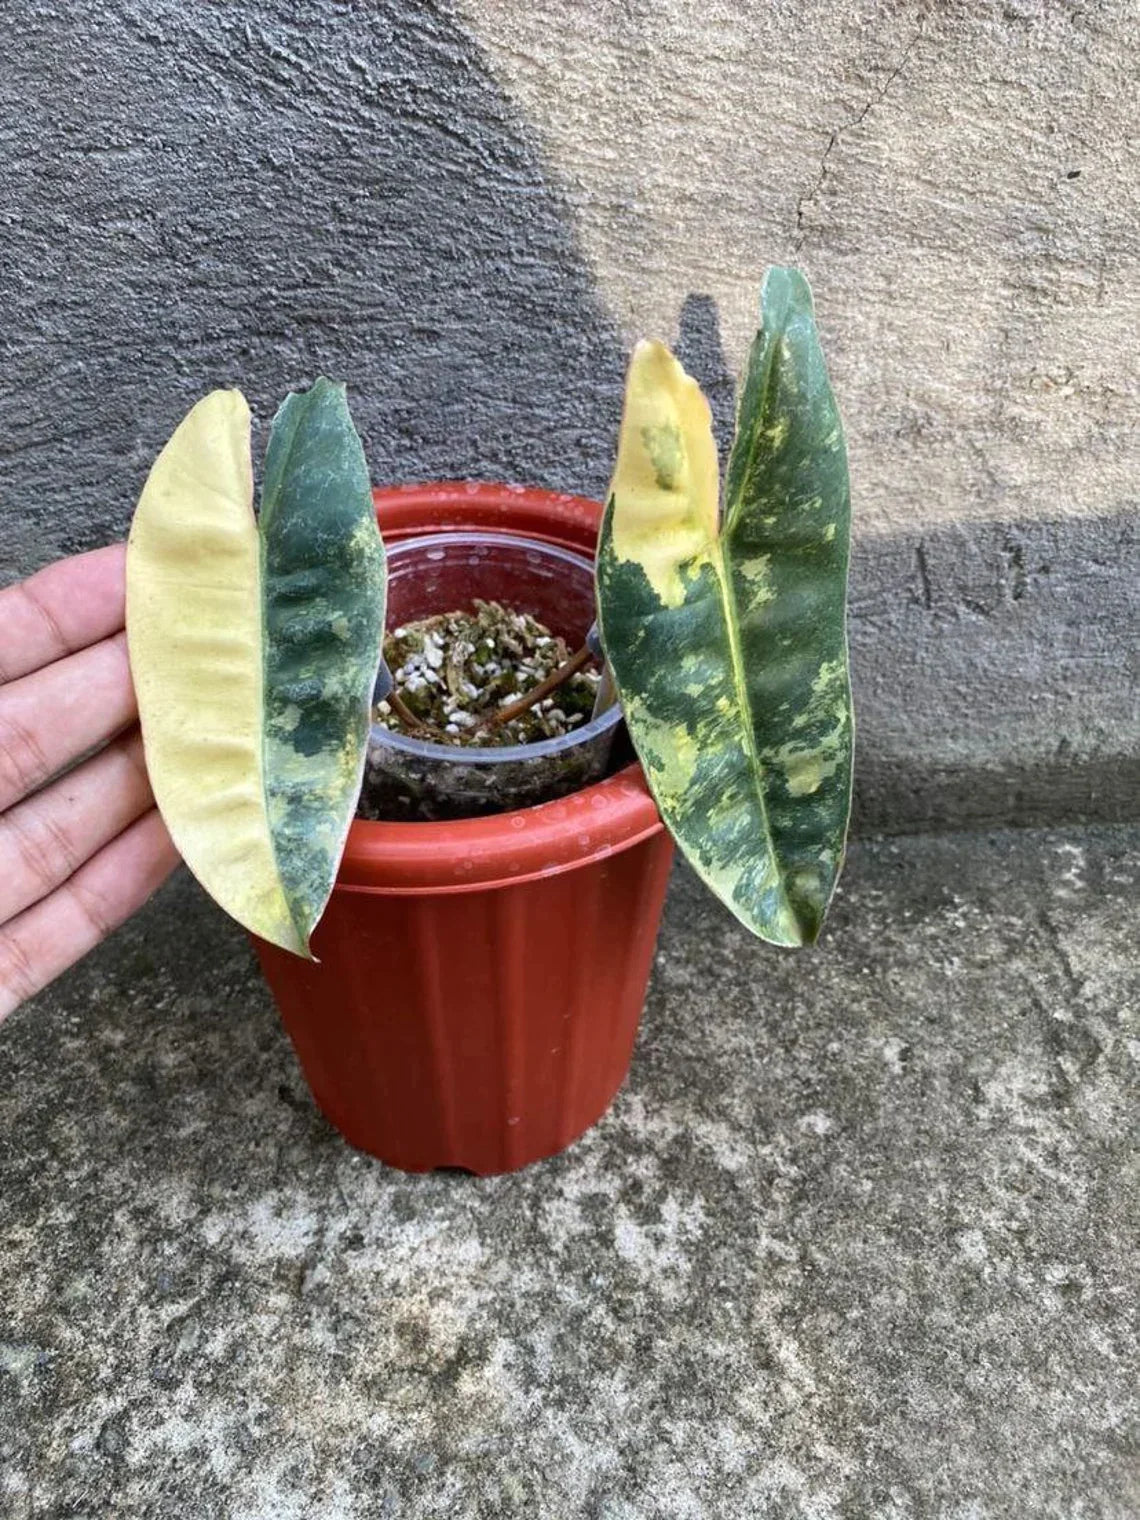 PHILODENDRON Billietiae Variegated 1 Leaf